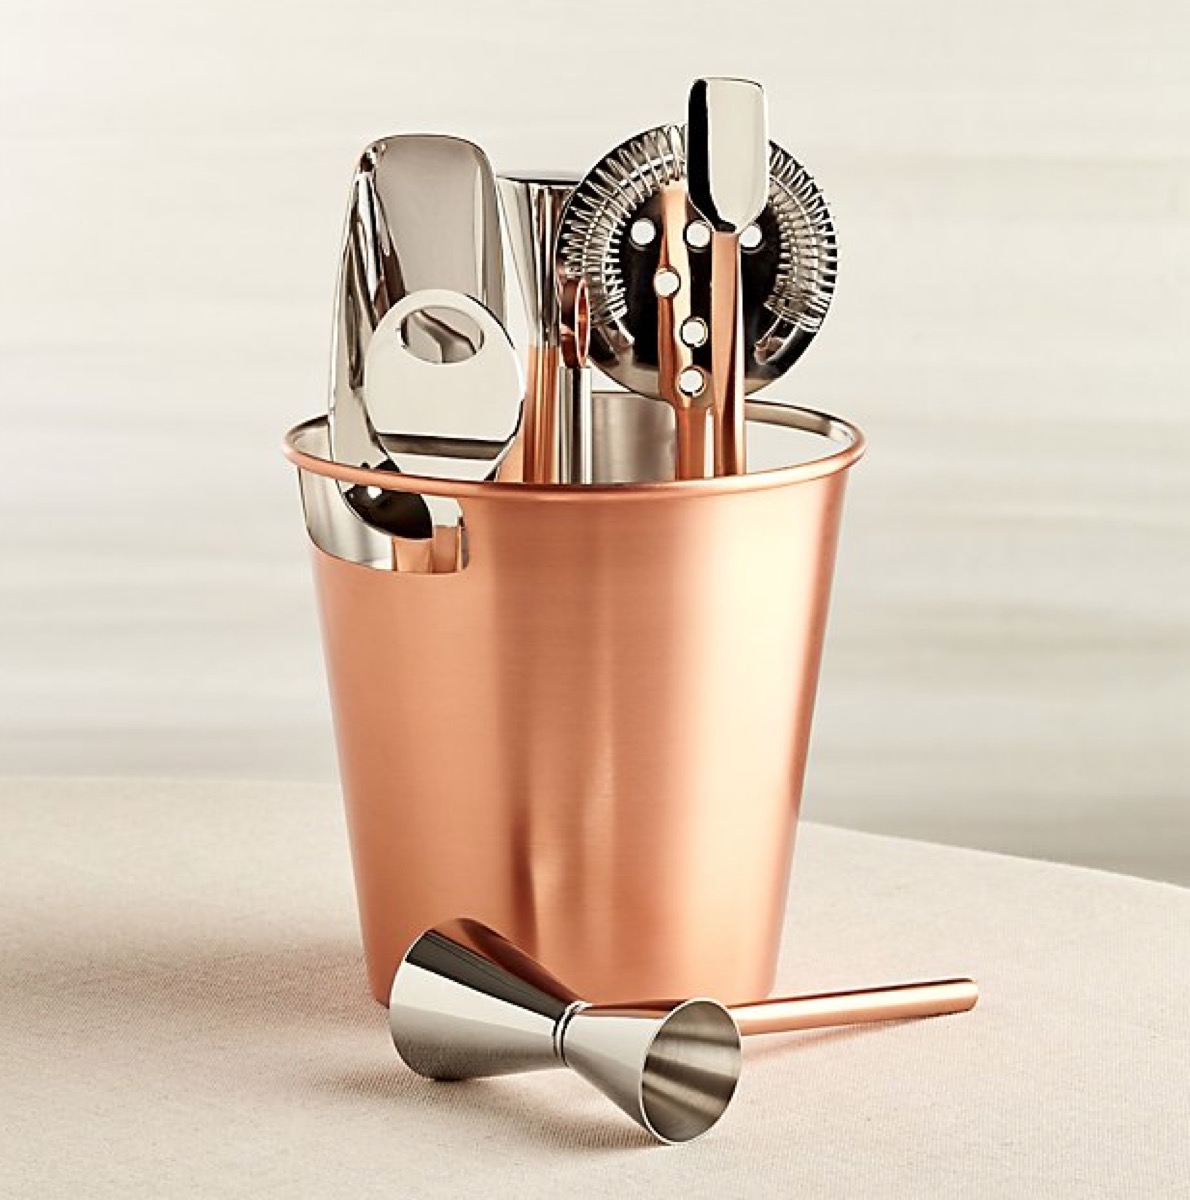 crate and barrel bar tool set in copper, gifts for girlfriend